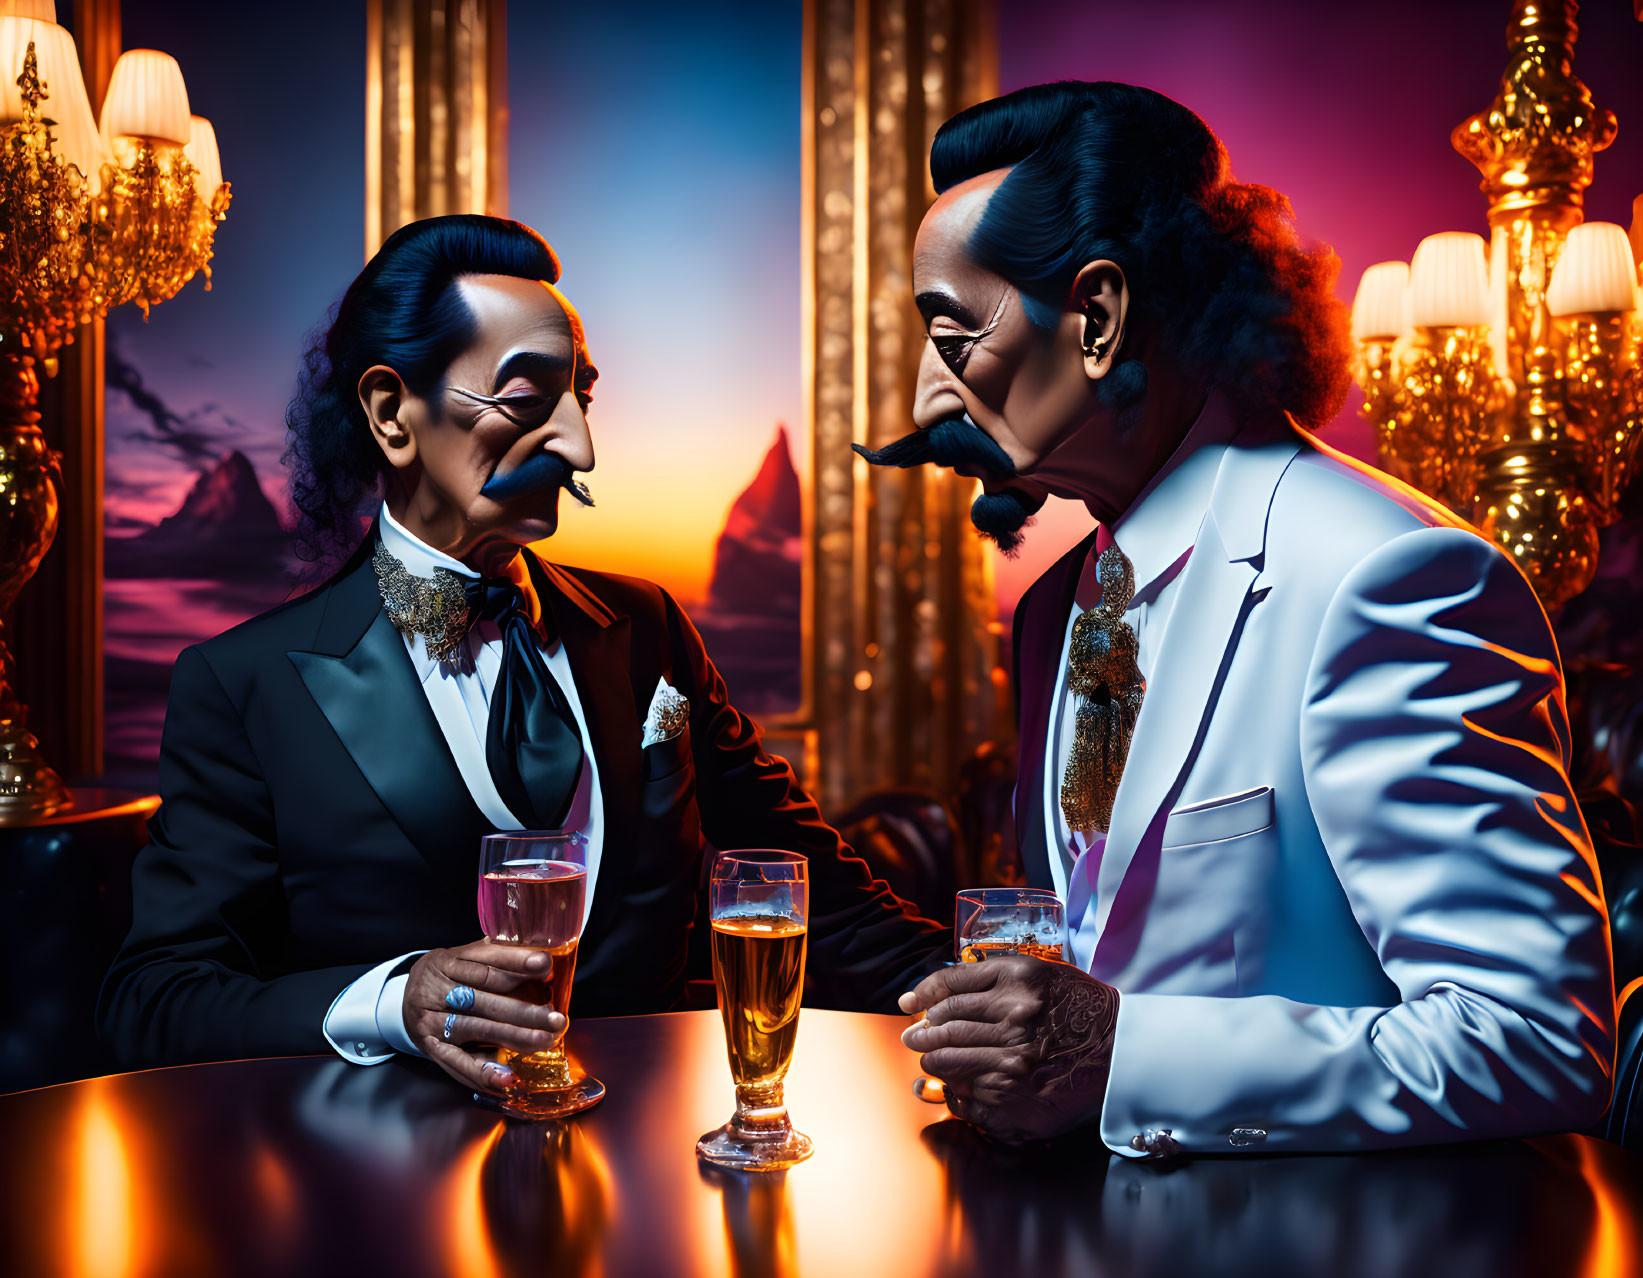 Luxurious bar scene: stylish men with extravagant moustaches sipping beer